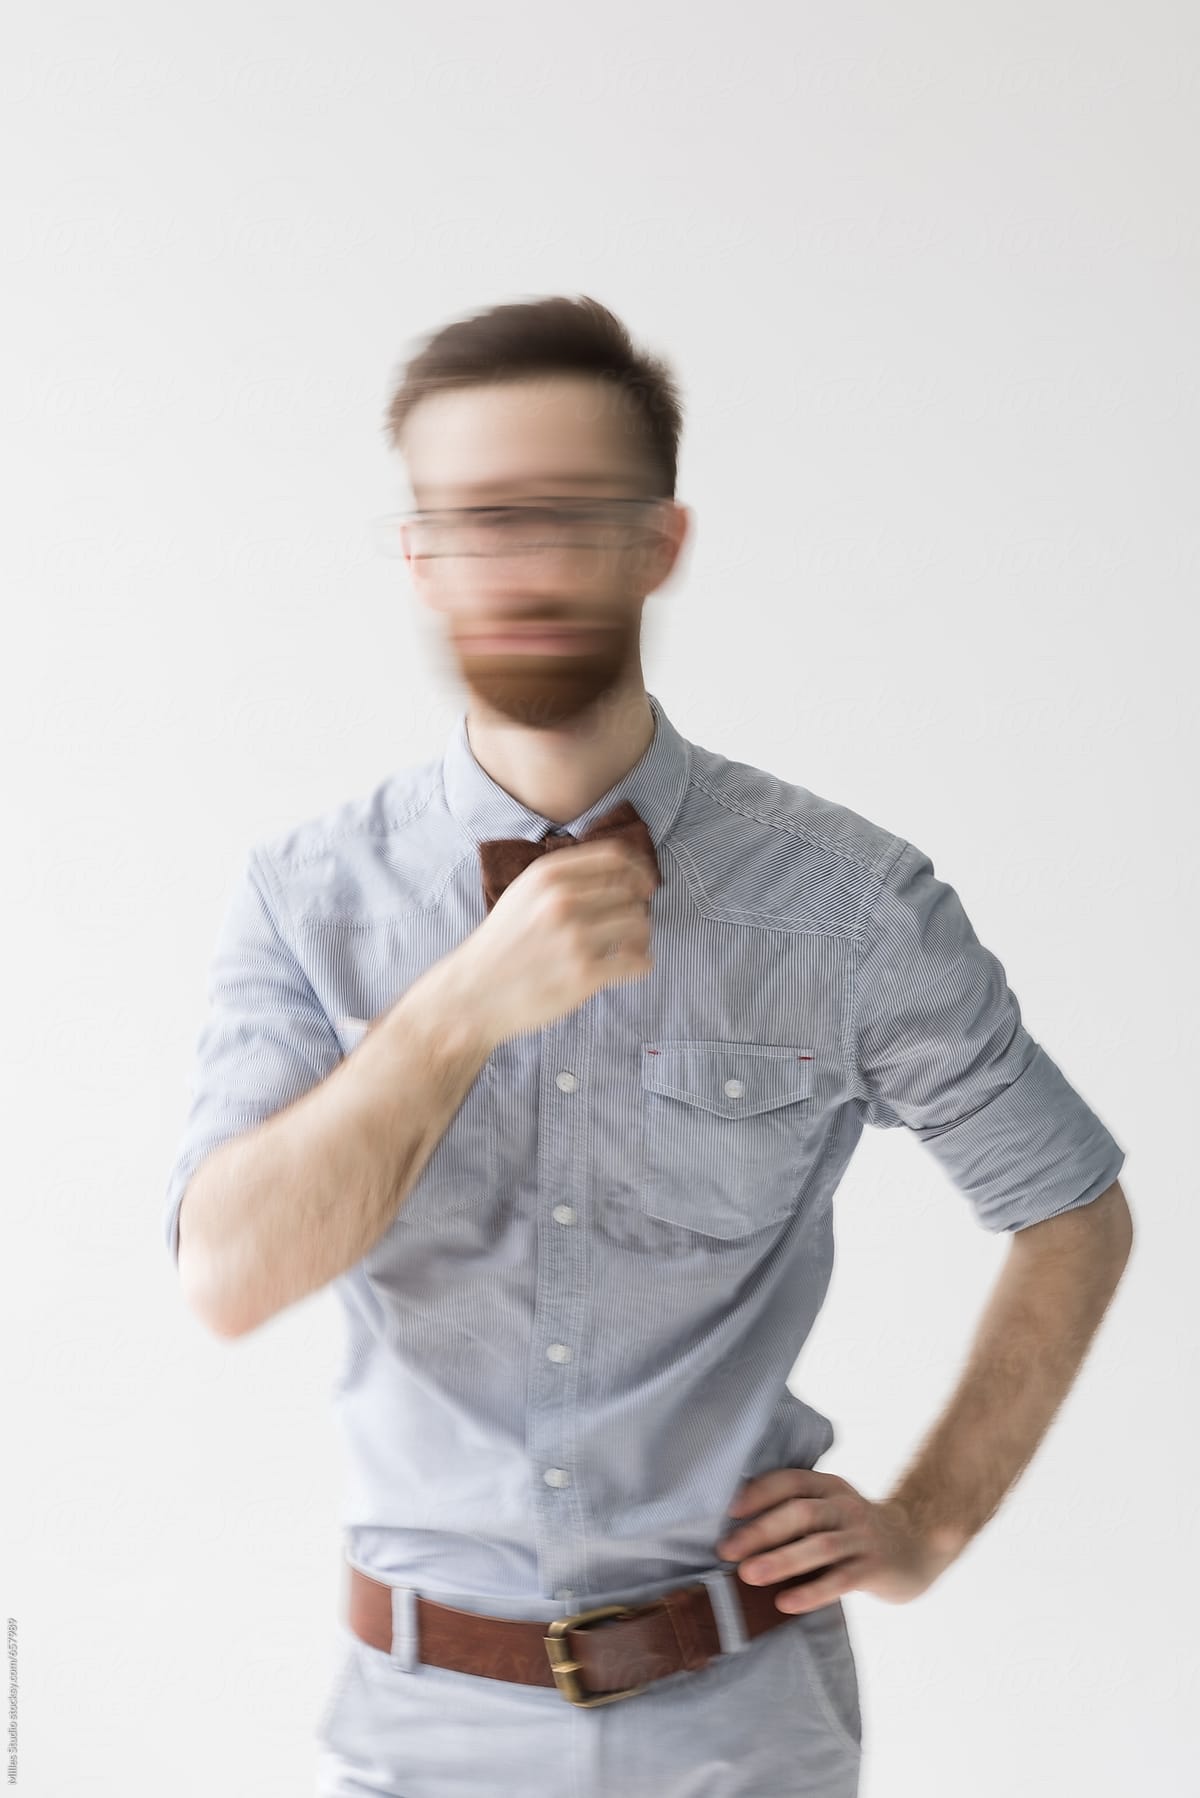 how to blur a face in a picture